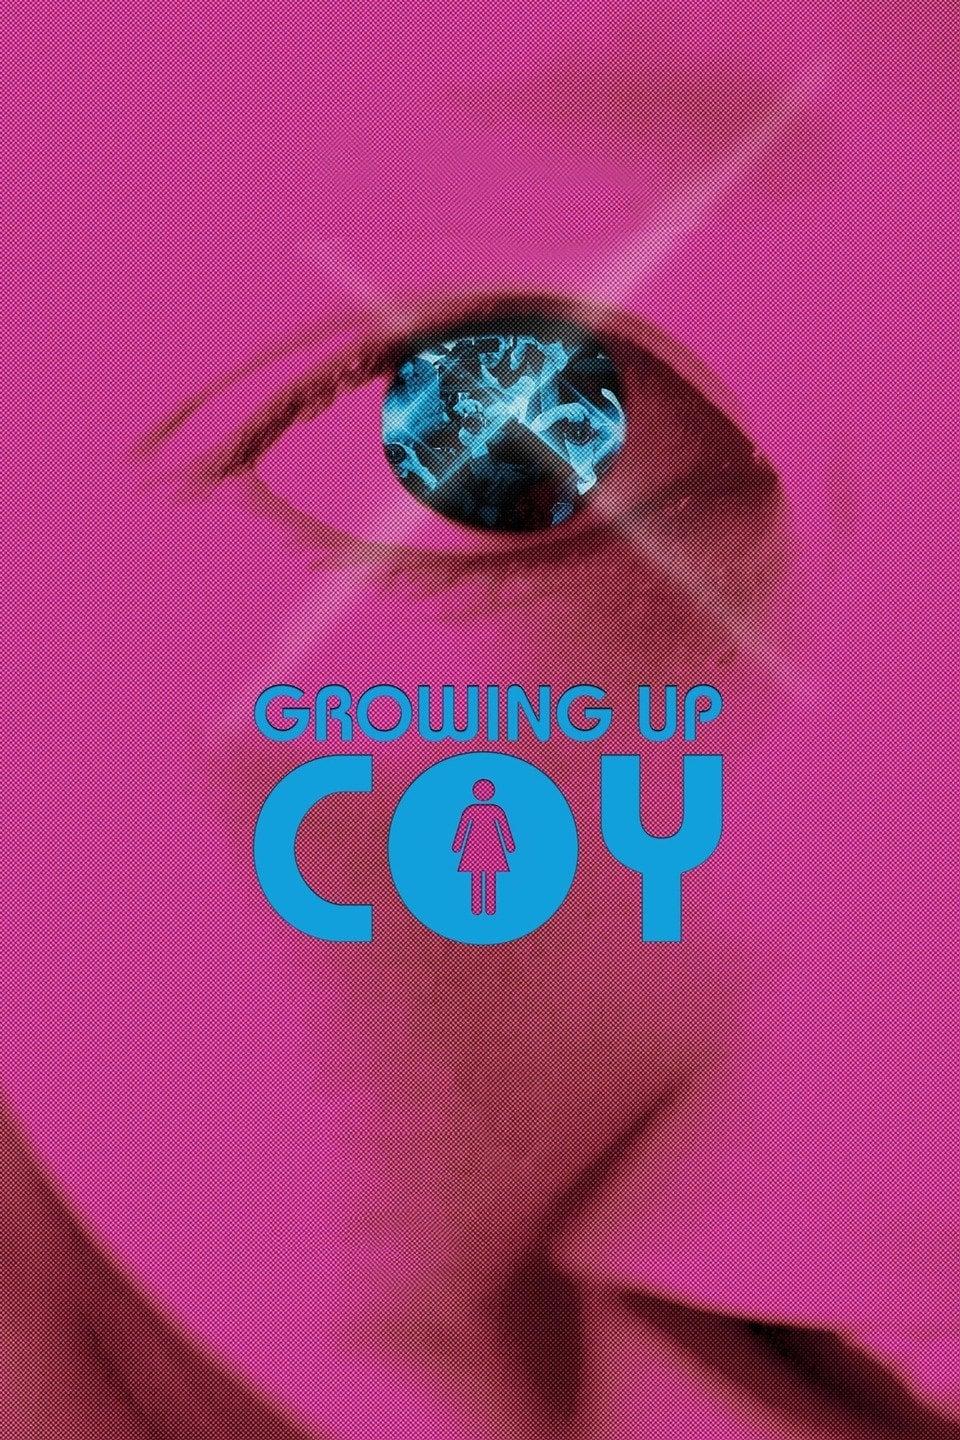 Growing Up Coy poster